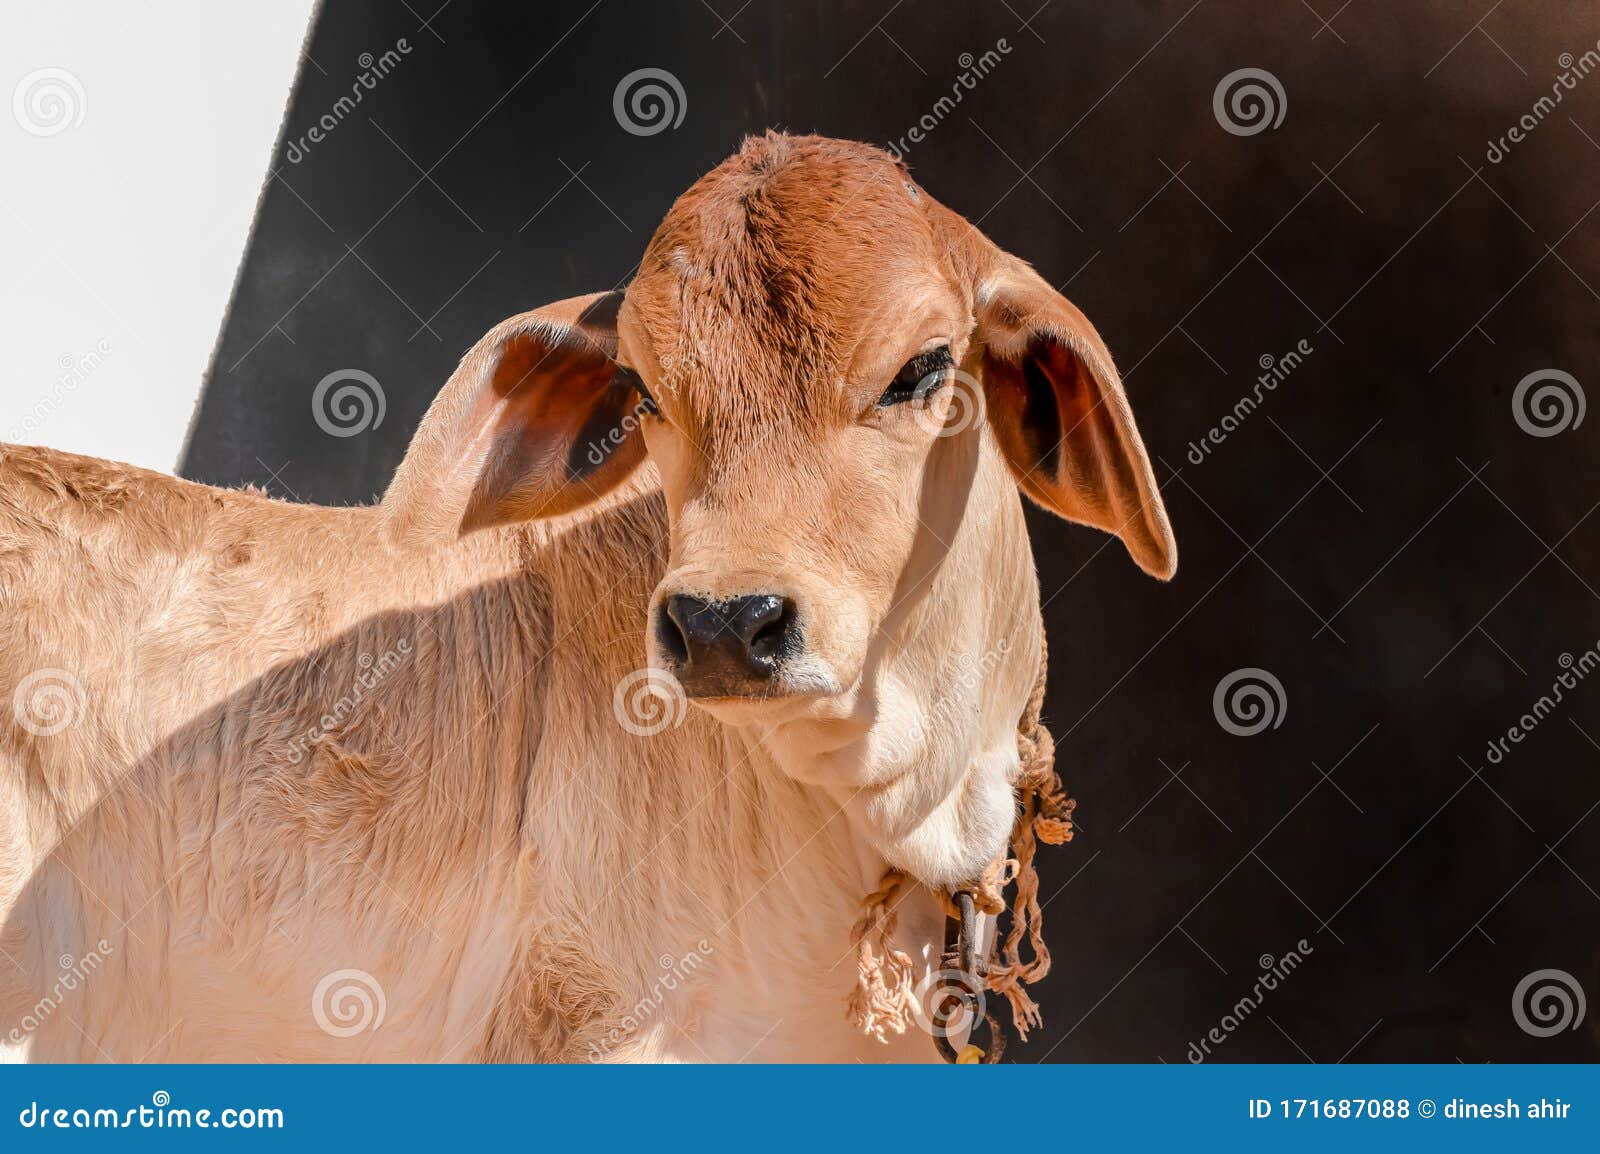 baby cows for sale in pakistan